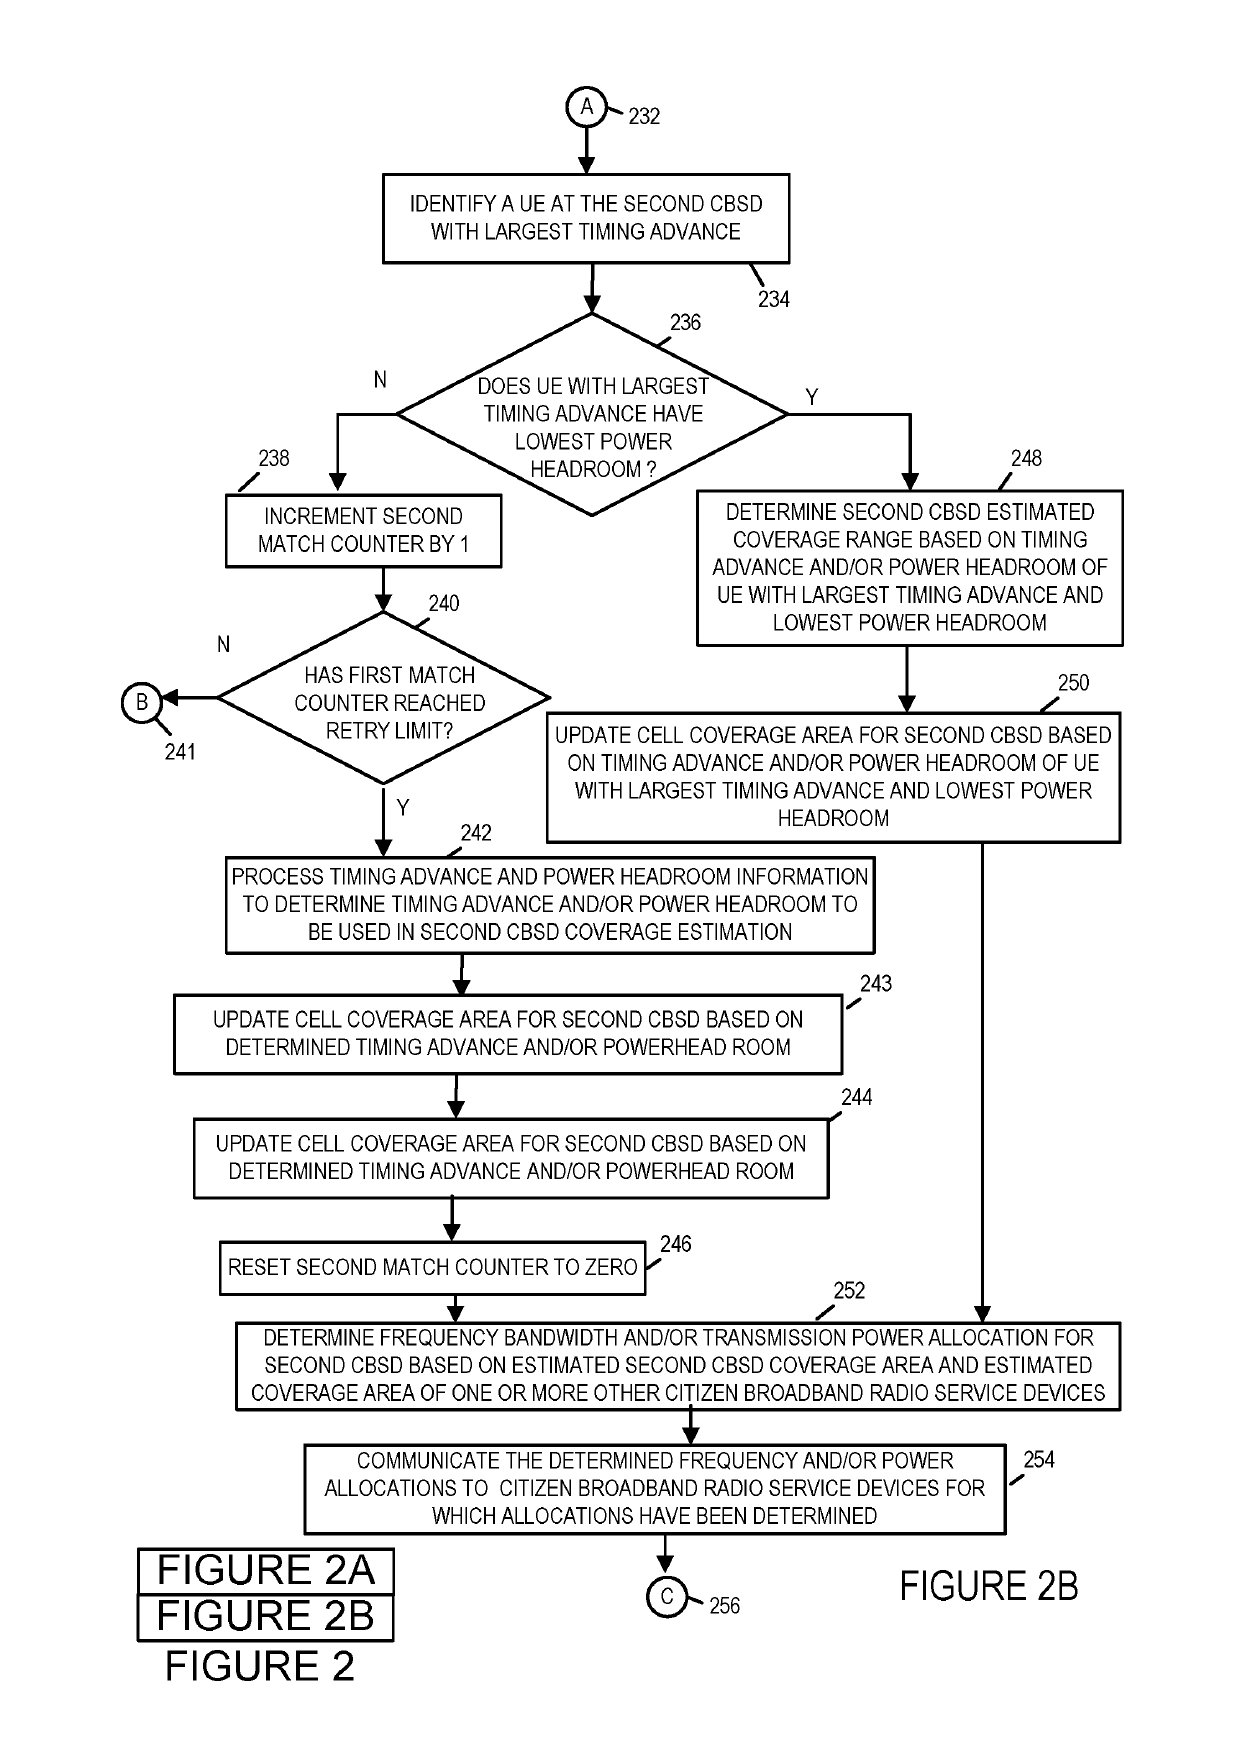 Methods and apparatus for estimating citizens broadband radio service network coverage